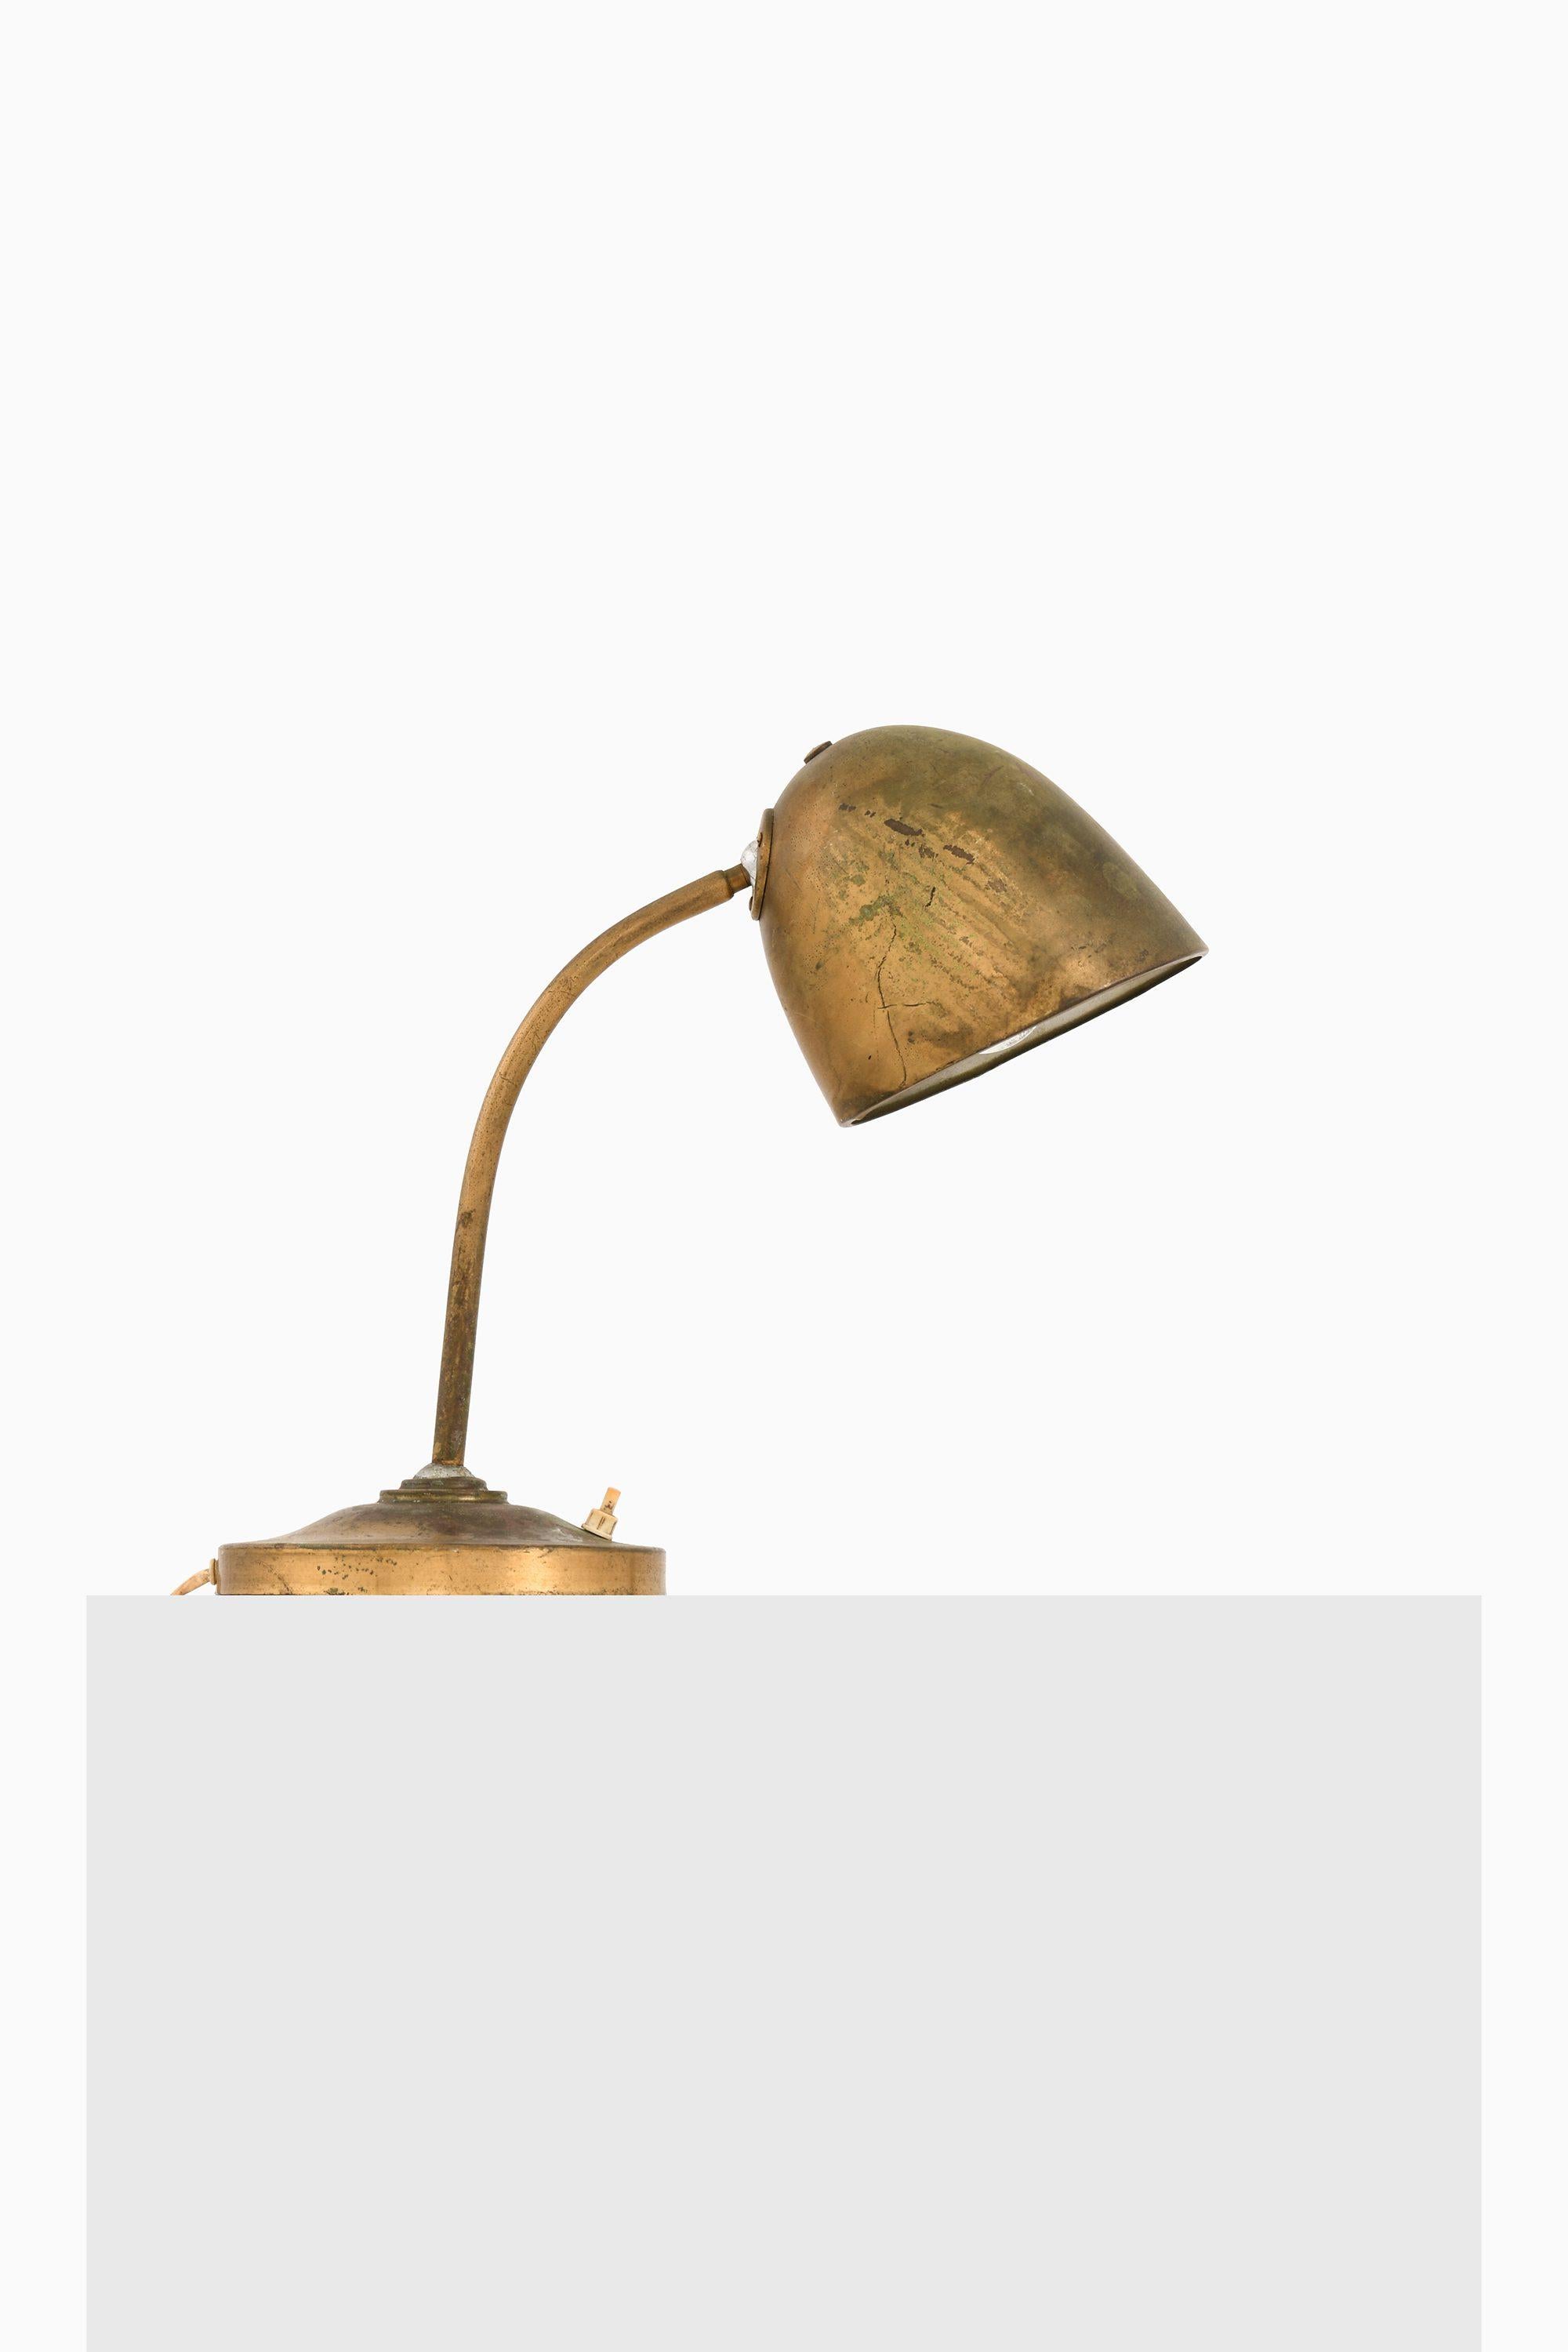 Danish Table Lamp in Brass Attributed To Vilhelm Lauritzen, 1950’s For Sale